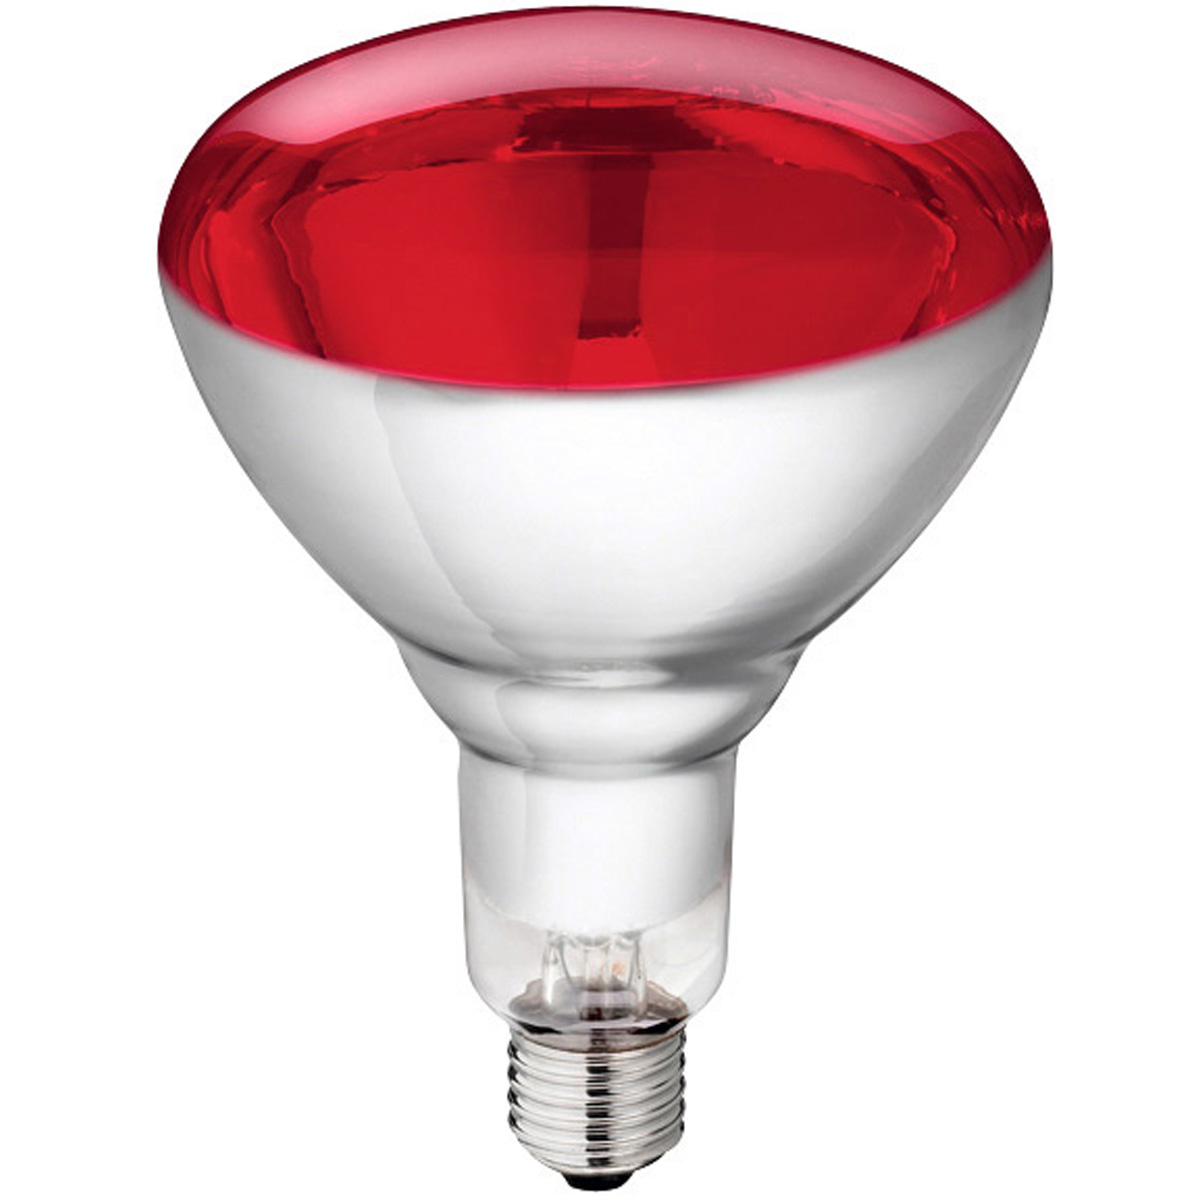 Philips hard glas infrared lamp red 150 W